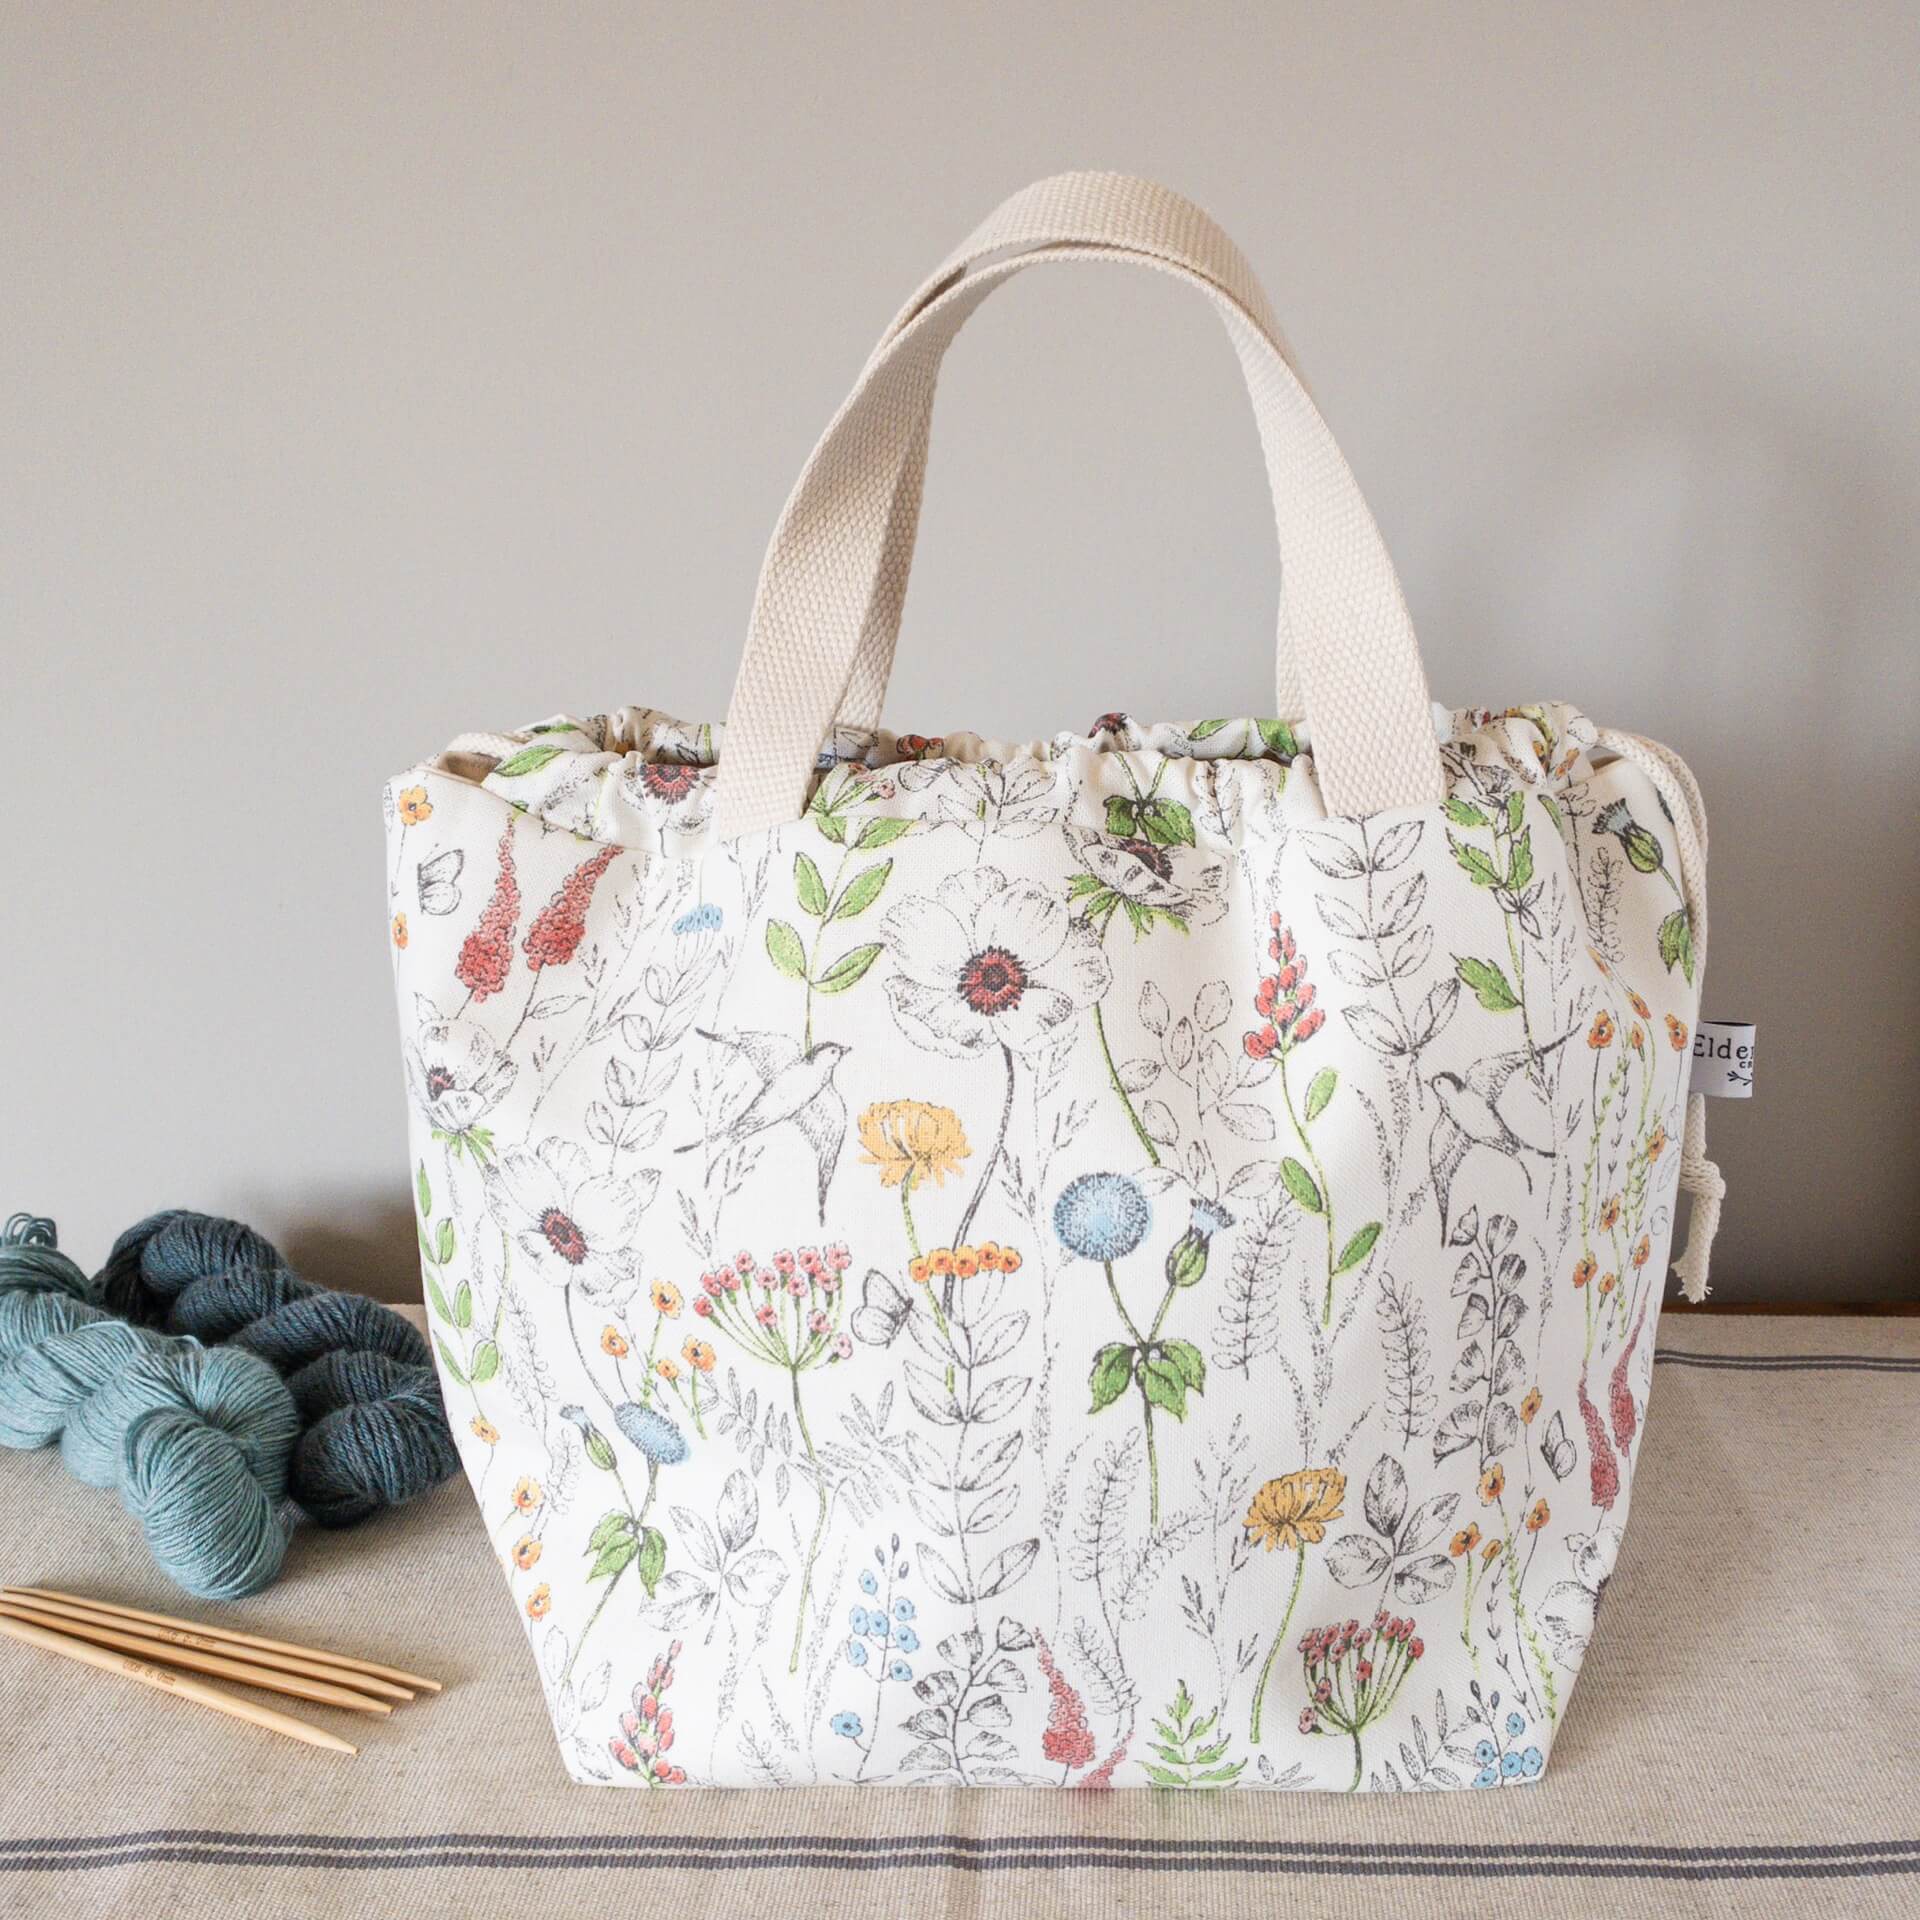 A large knitting project bag sits on a wooden table next to two skeins of yar and some wooden knitting needles. The bag is made from a summery floral fabric. 